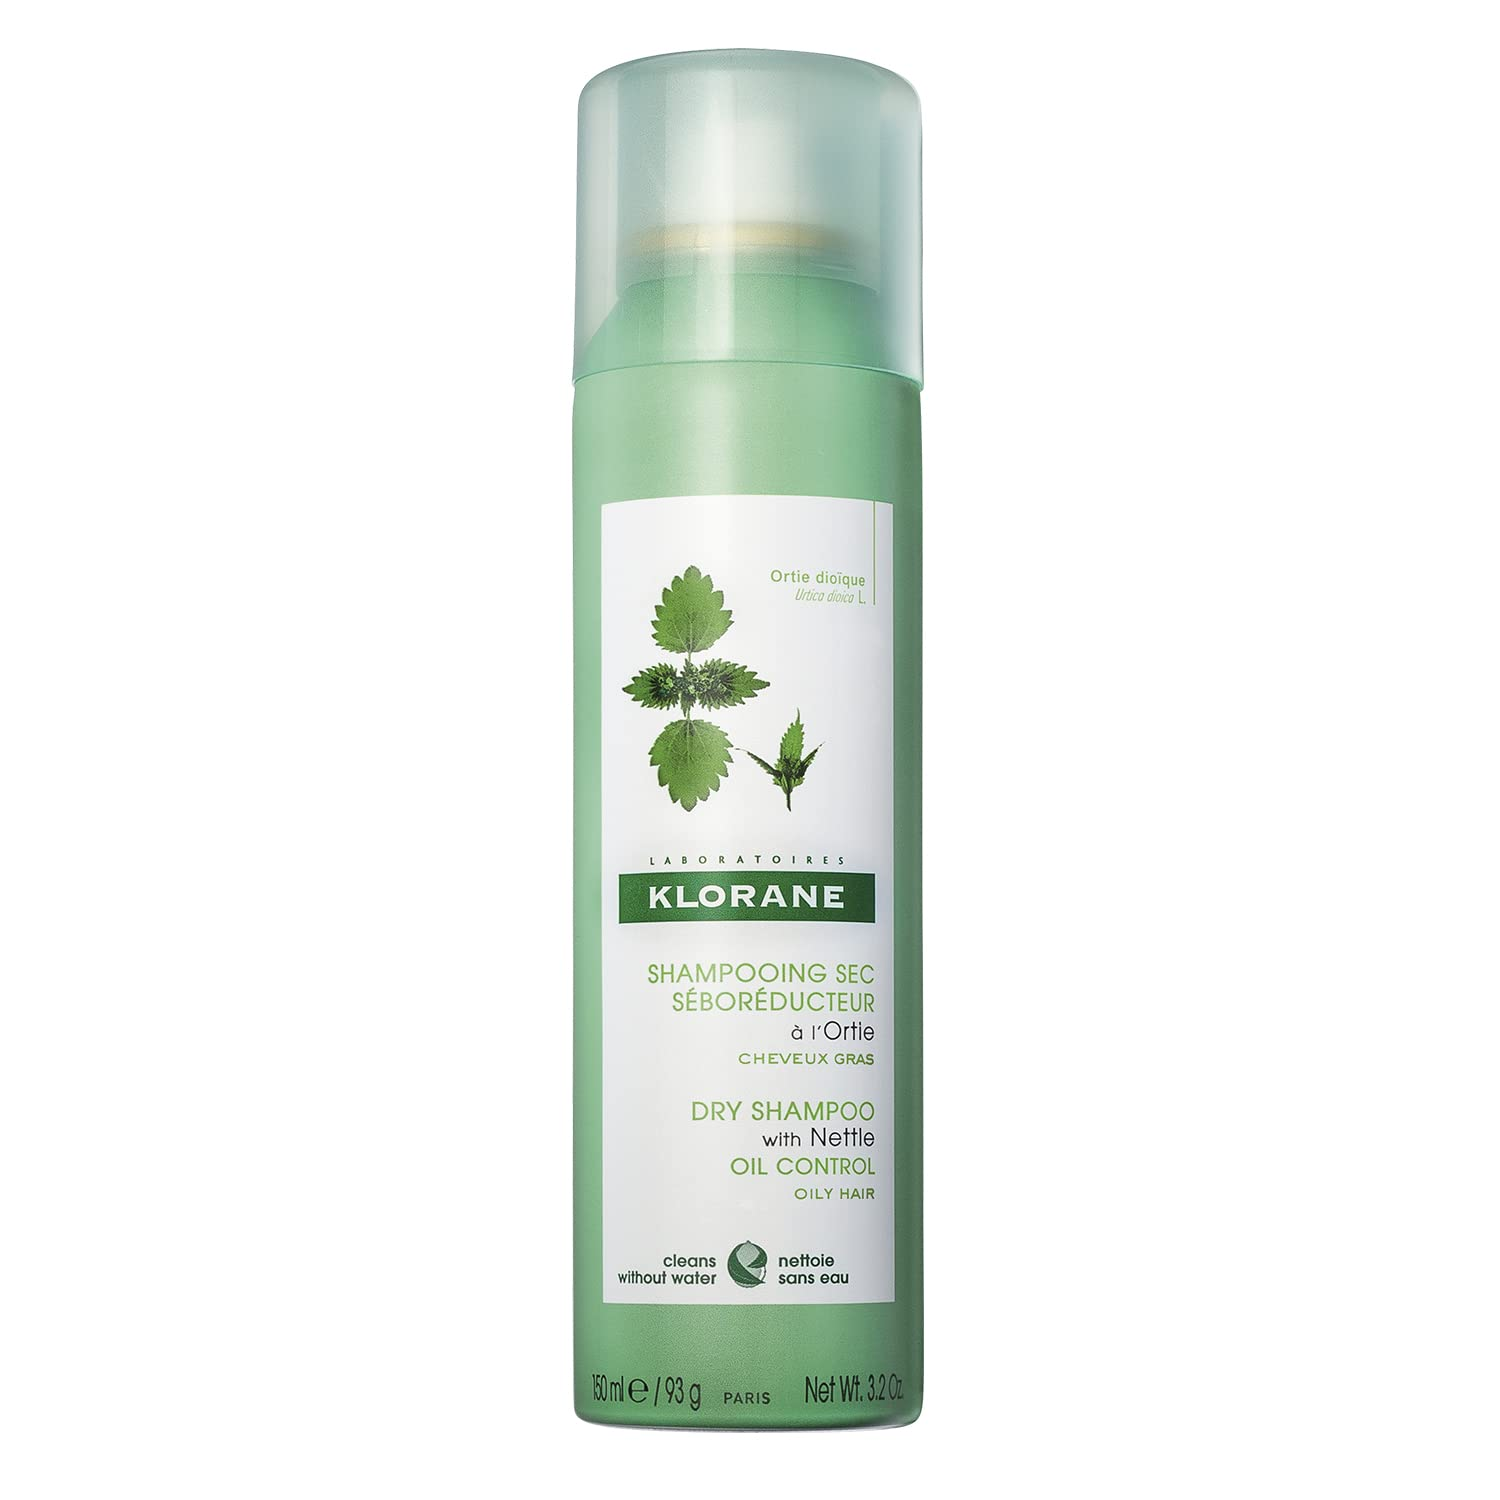 Klorane Dry Shampoo with Nettle for Oily Hair and Scalp - 3.2 oz. $9.00